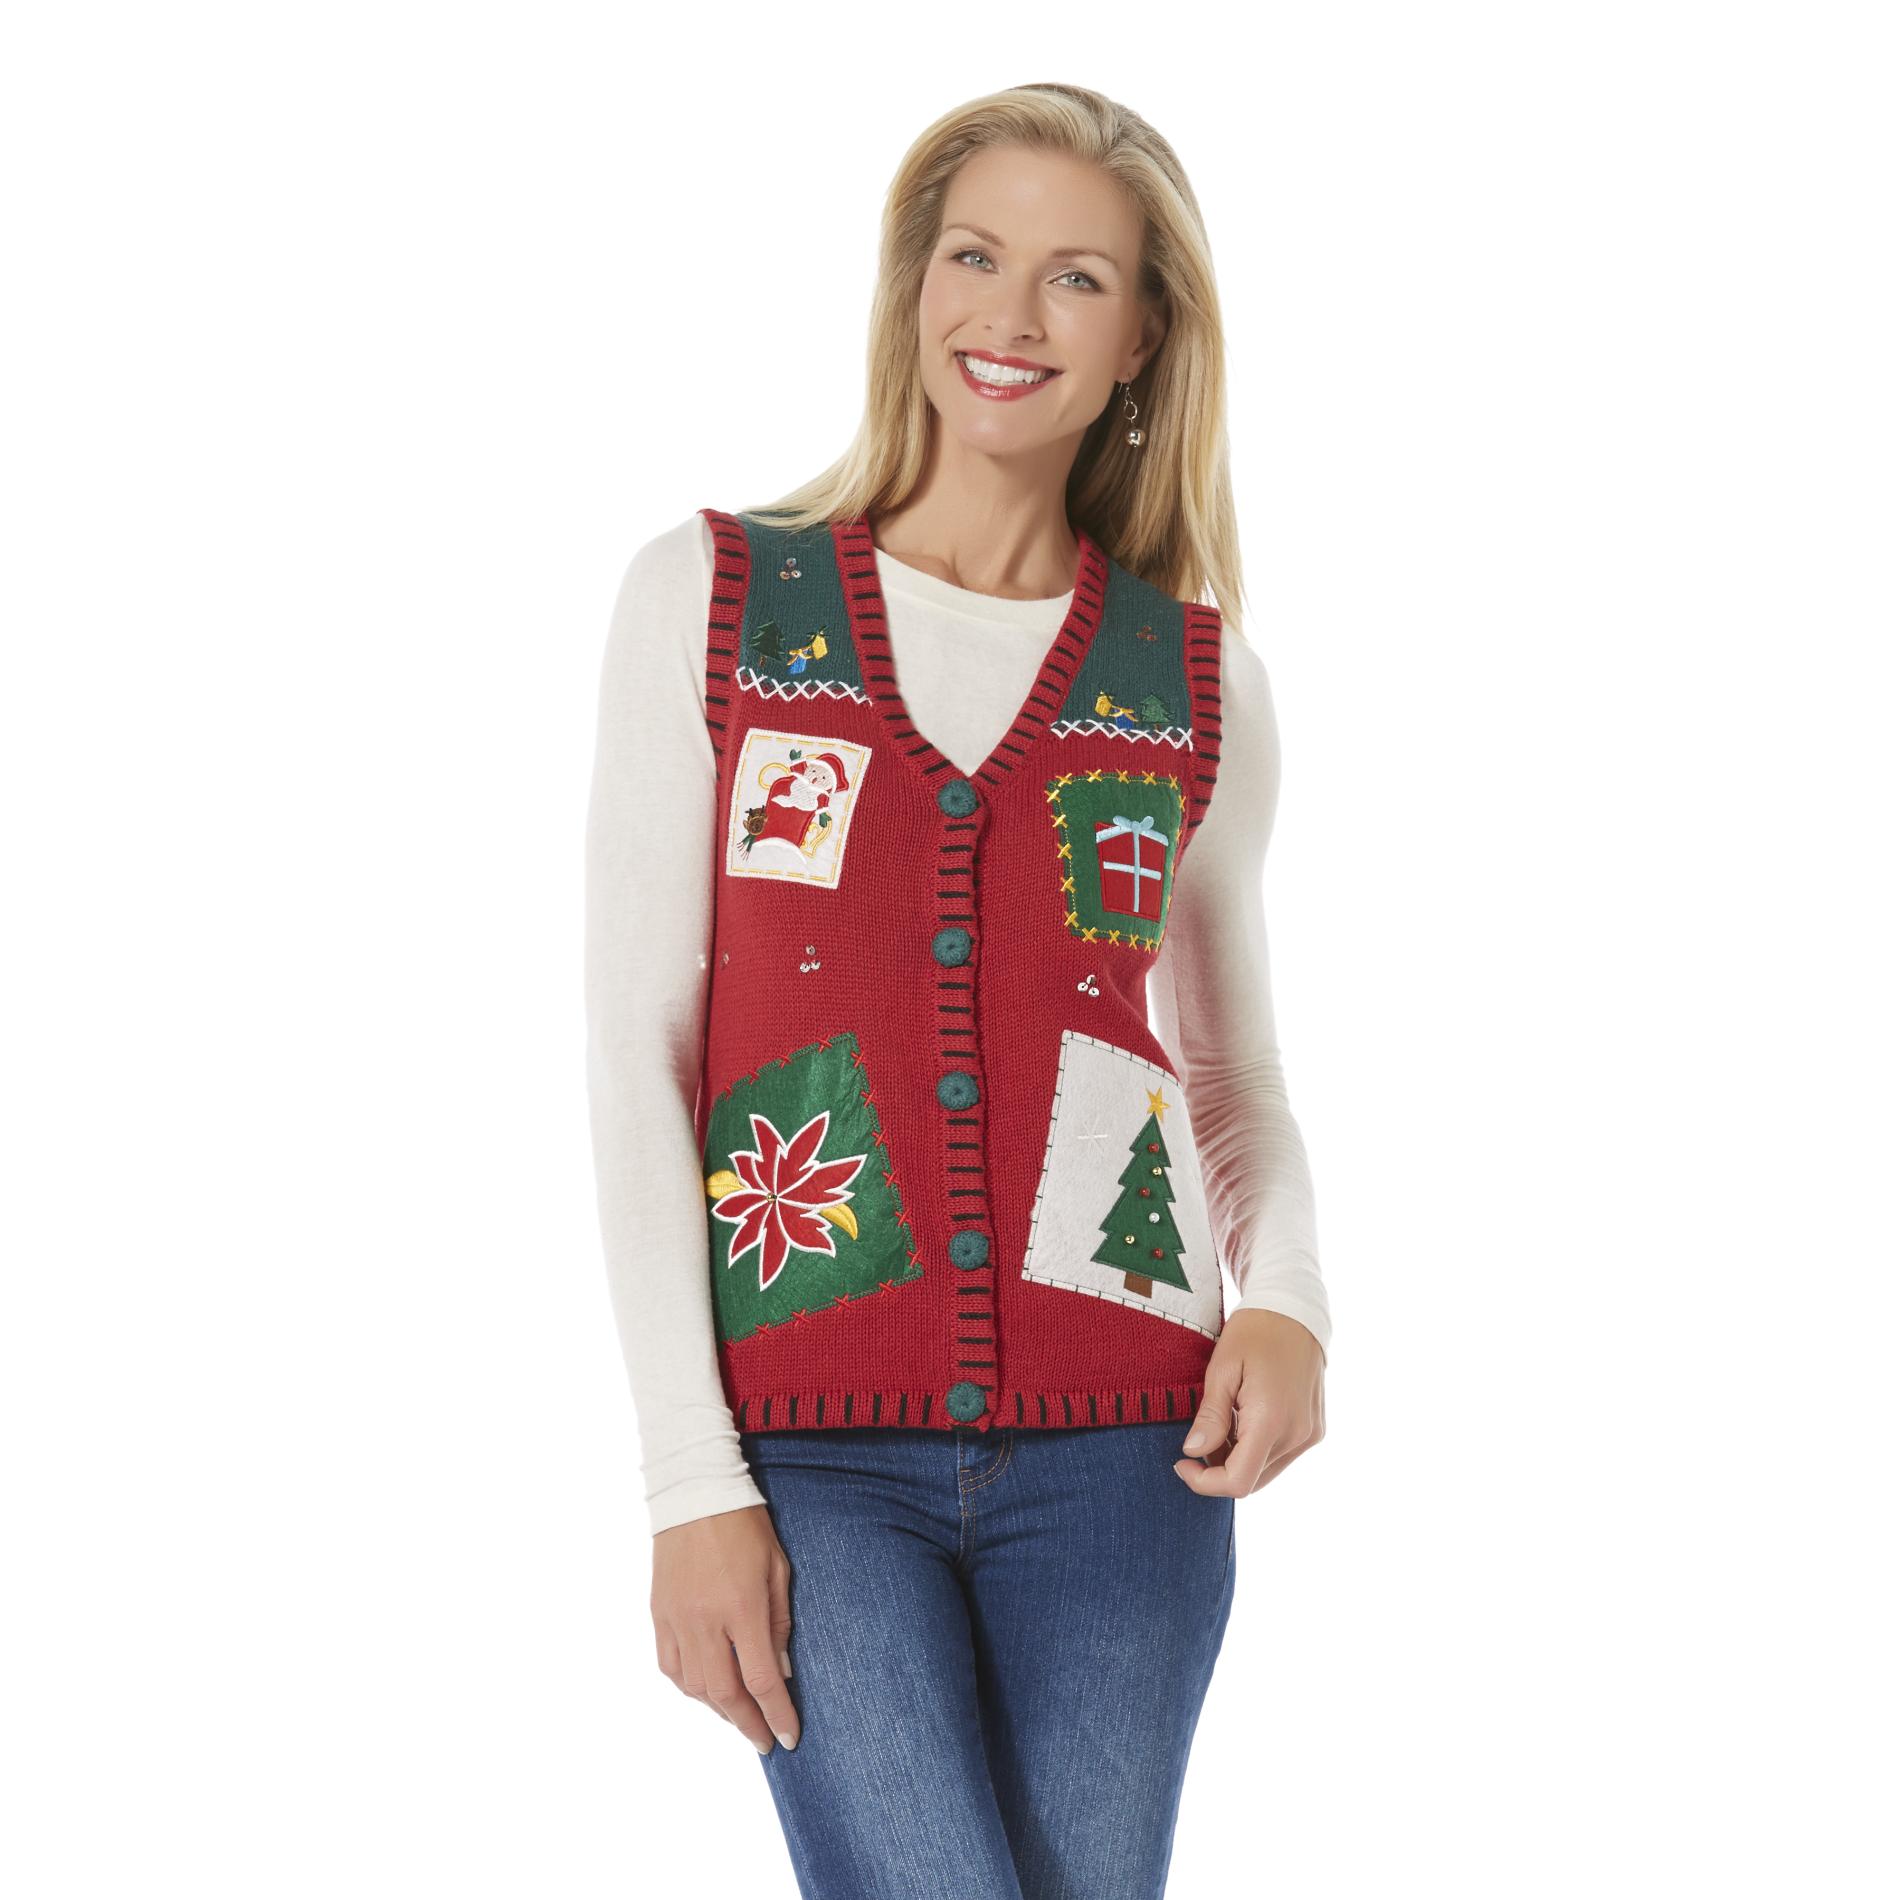 Holiday Editions Women's Christmas Sweater Vest - Patchwork Quilt